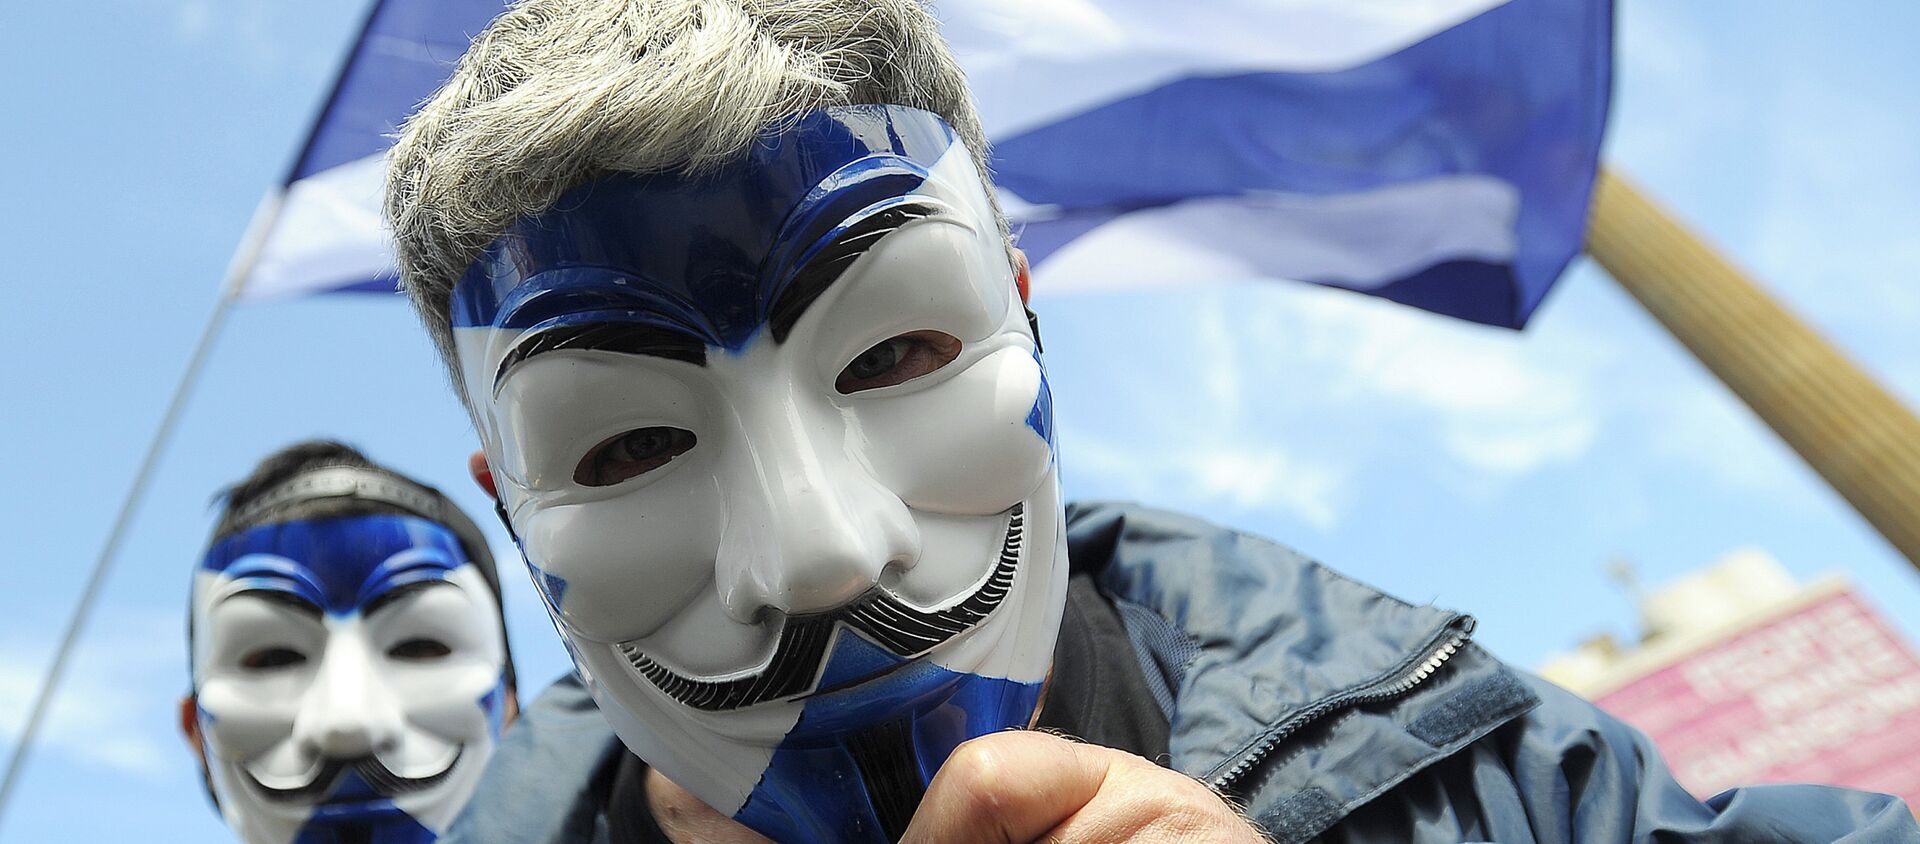 Pro-Scottish Independence supporters with Scottish Saltire flag masks pose for a picture at a rally in George Square in Glasgow, Scotland on July 30, 2016 to call for Scottish independence from the UK.  - Sputnik International, 1920, 31.01.2020